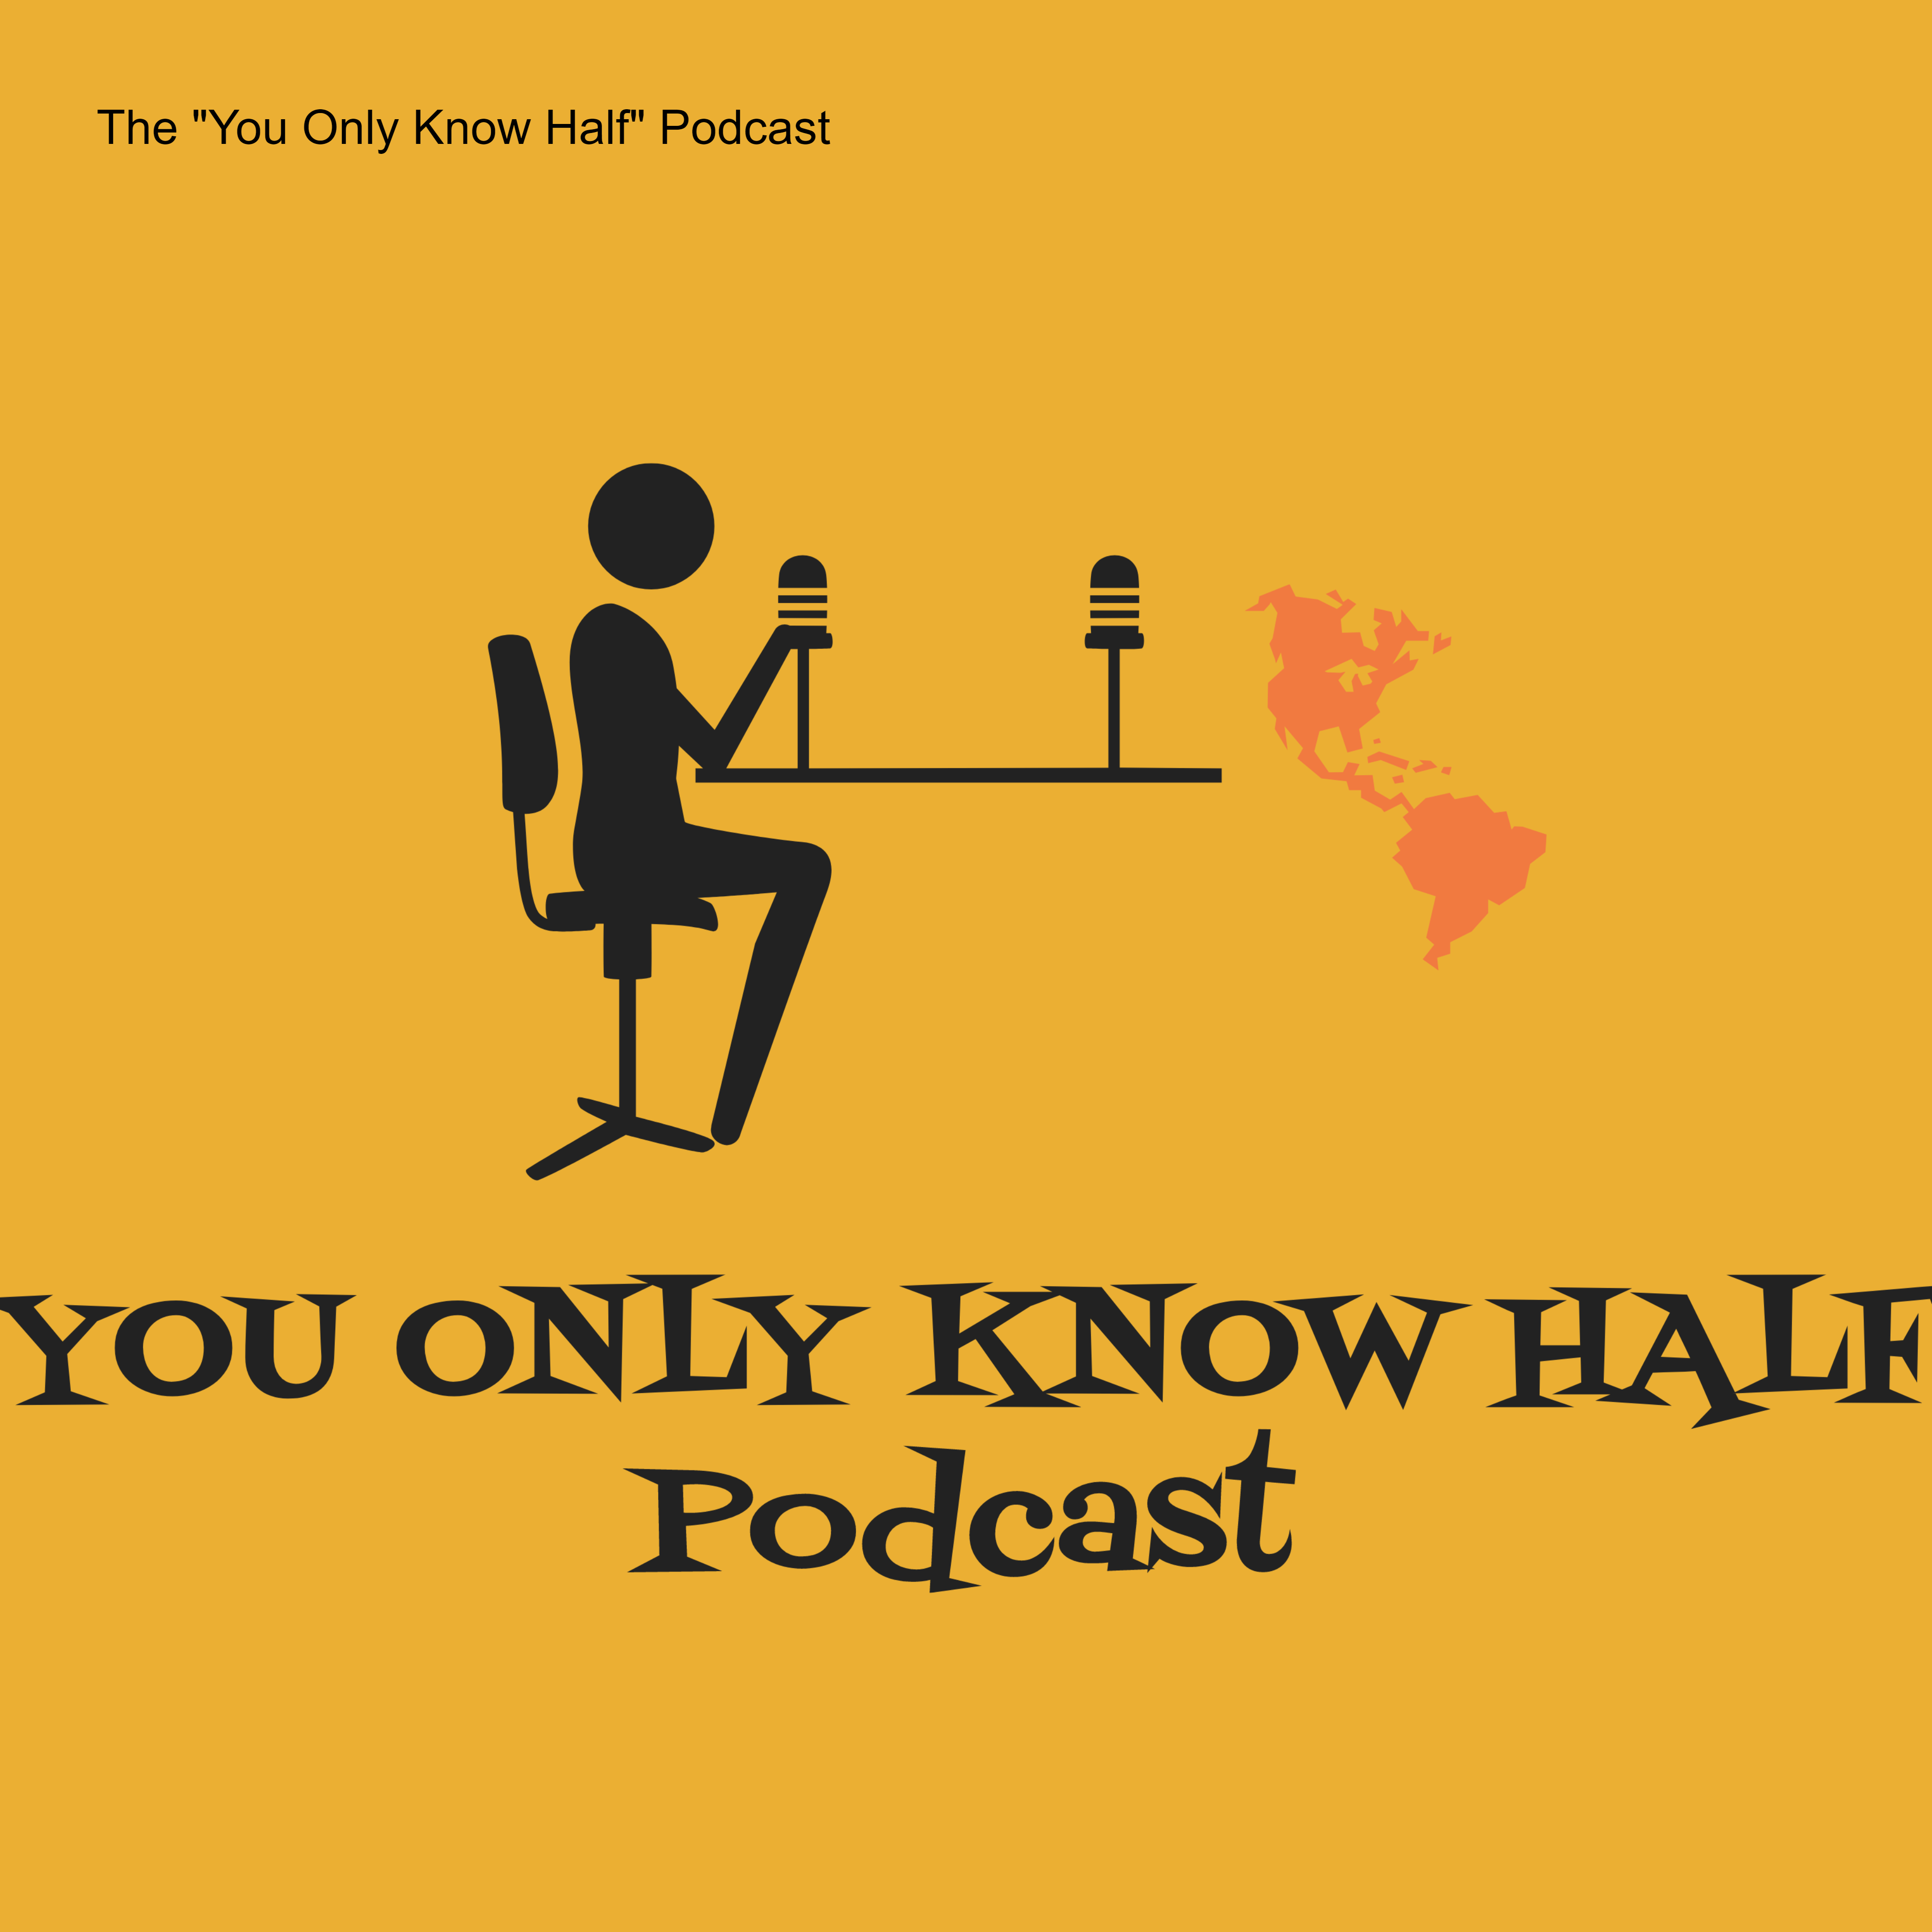 The "You Only Know Half" Podcast